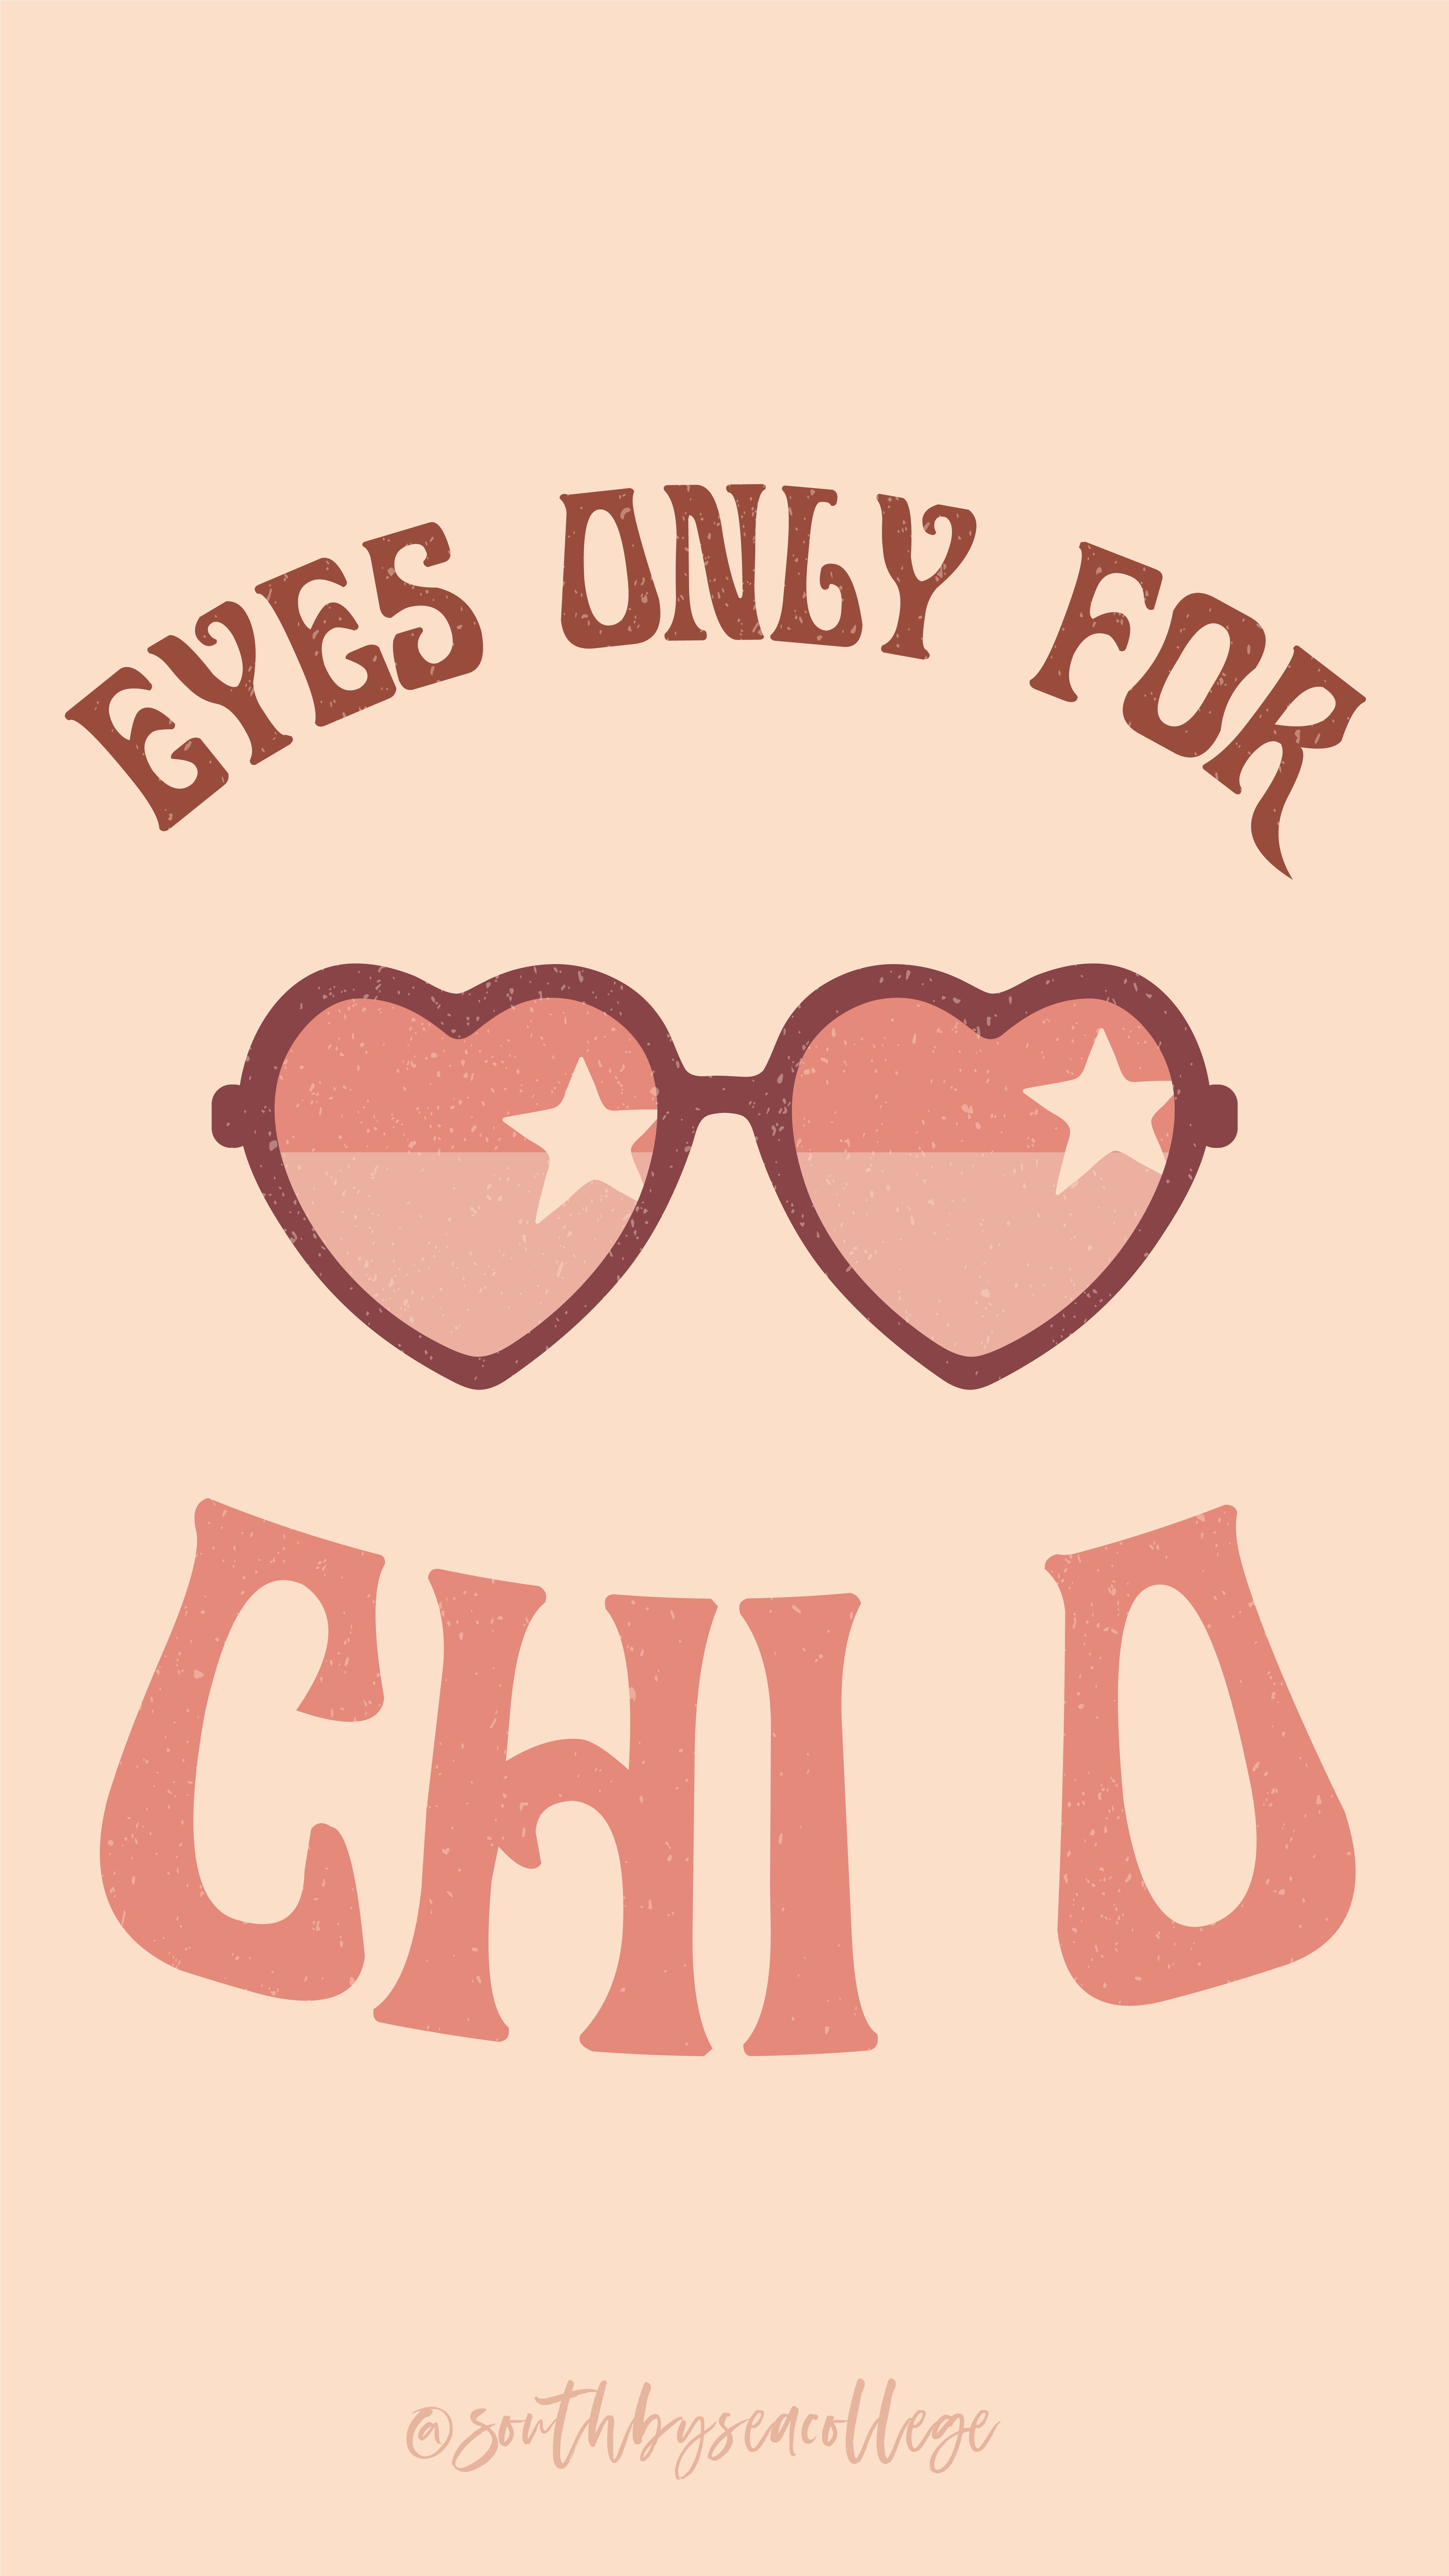 Chi Omega Graphics Wallpapers